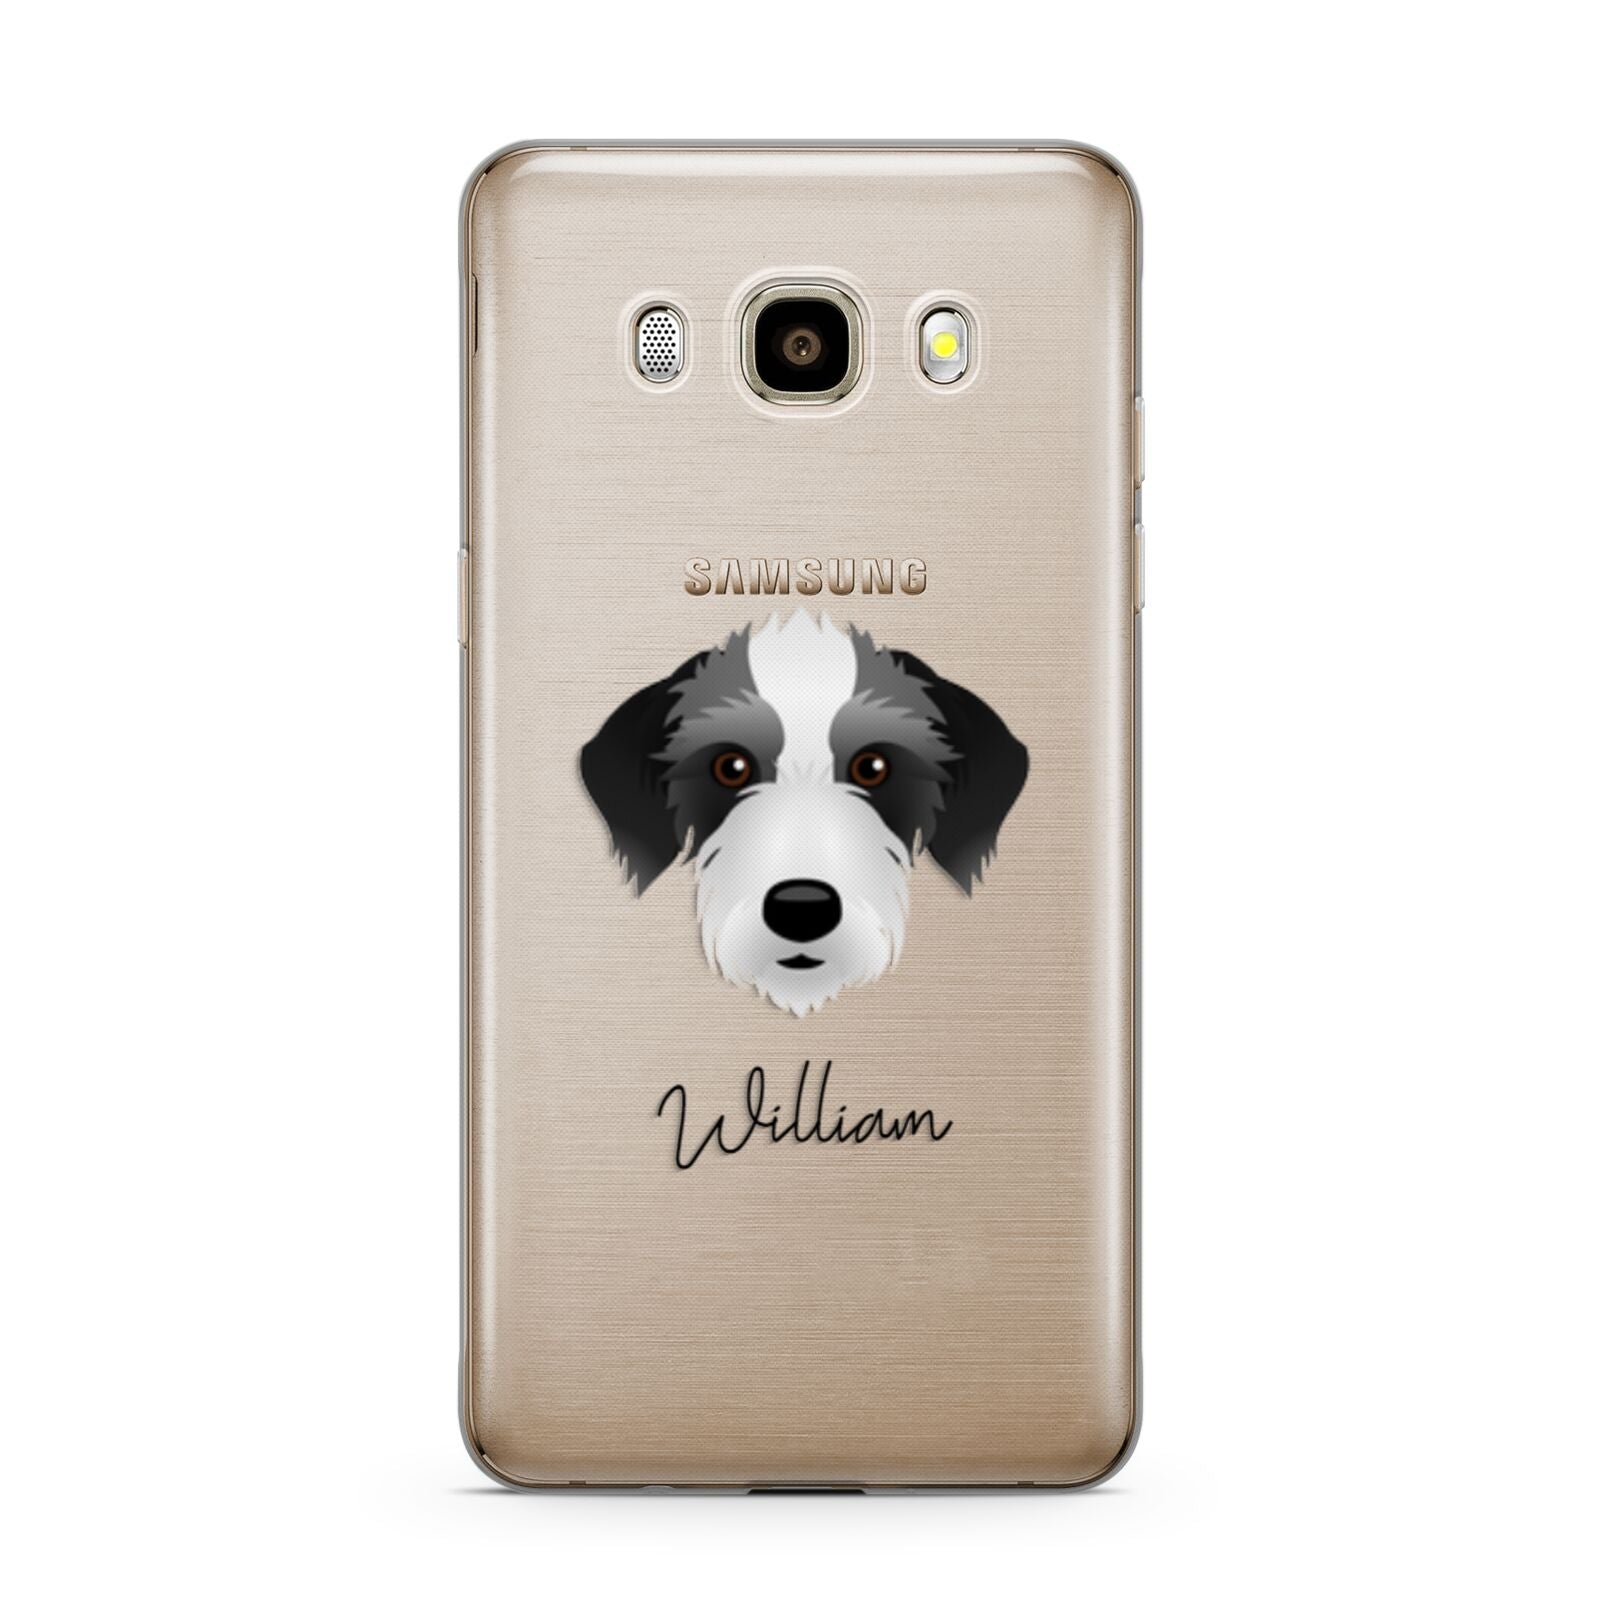 Bedlington Whippet Personalised Samsung Galaxy J7 2016 Case on gold phone